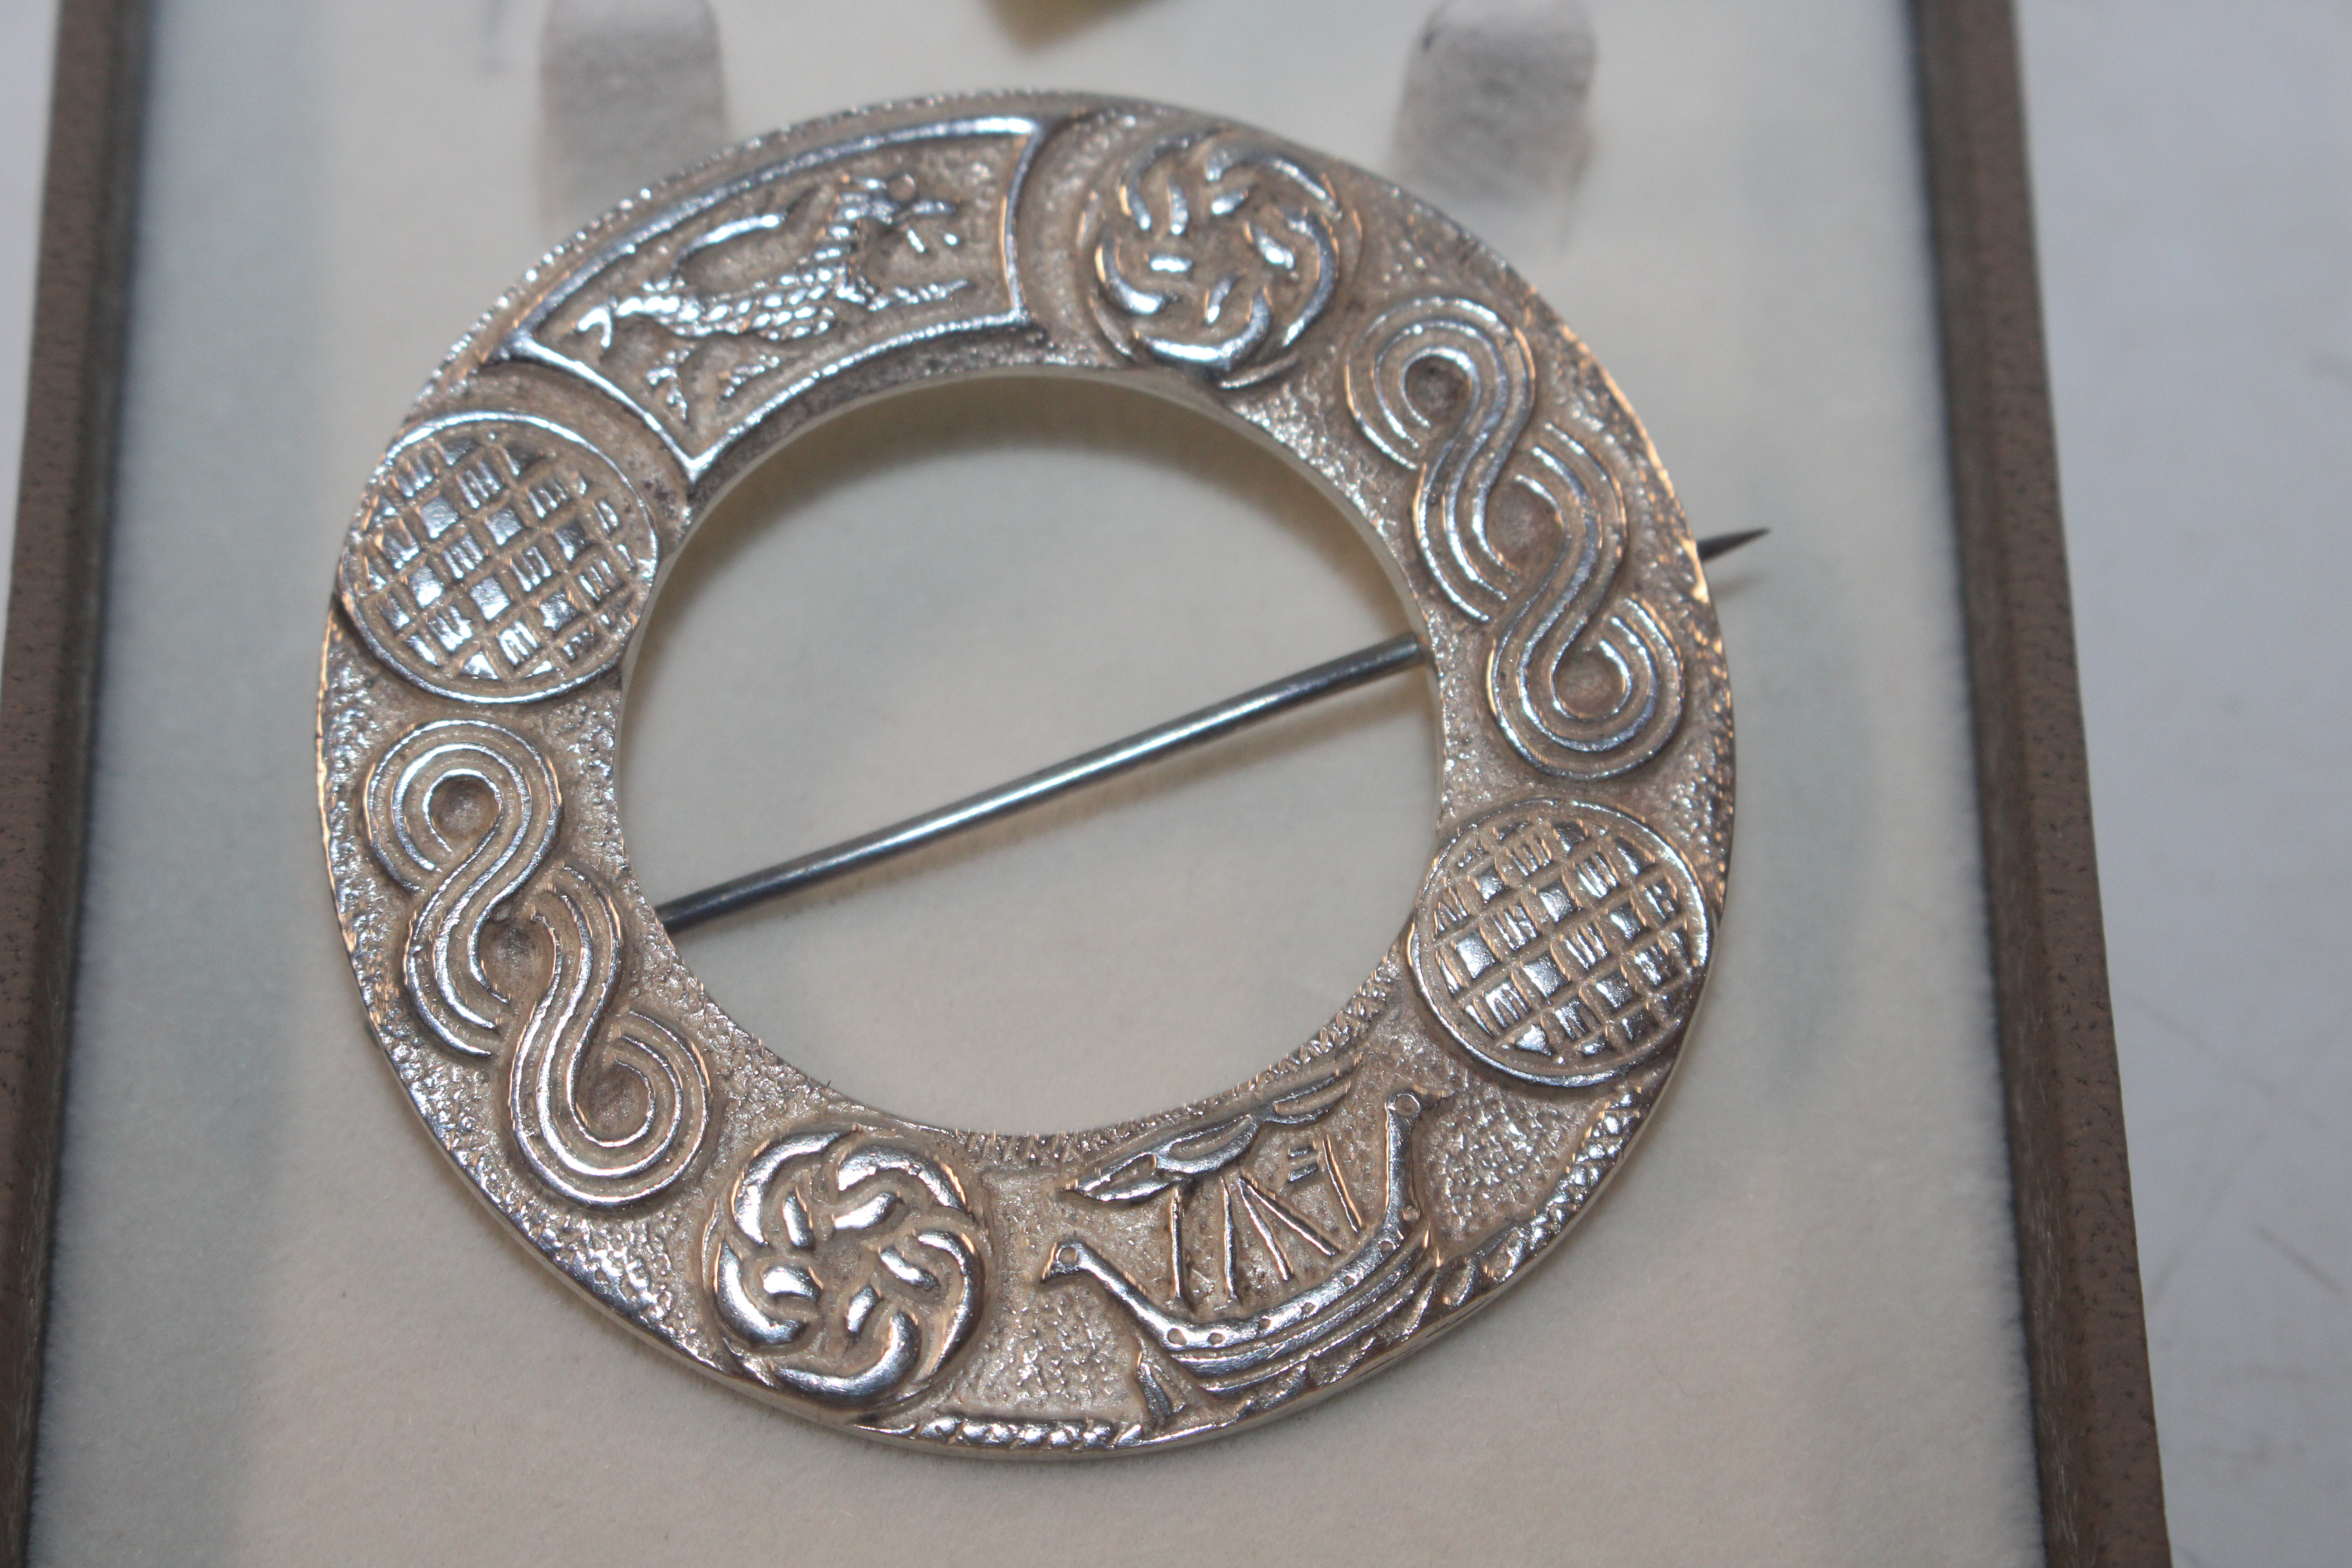 A 1951 Robert Allison Glasgow Sterling silver broo - Image 2 of 4